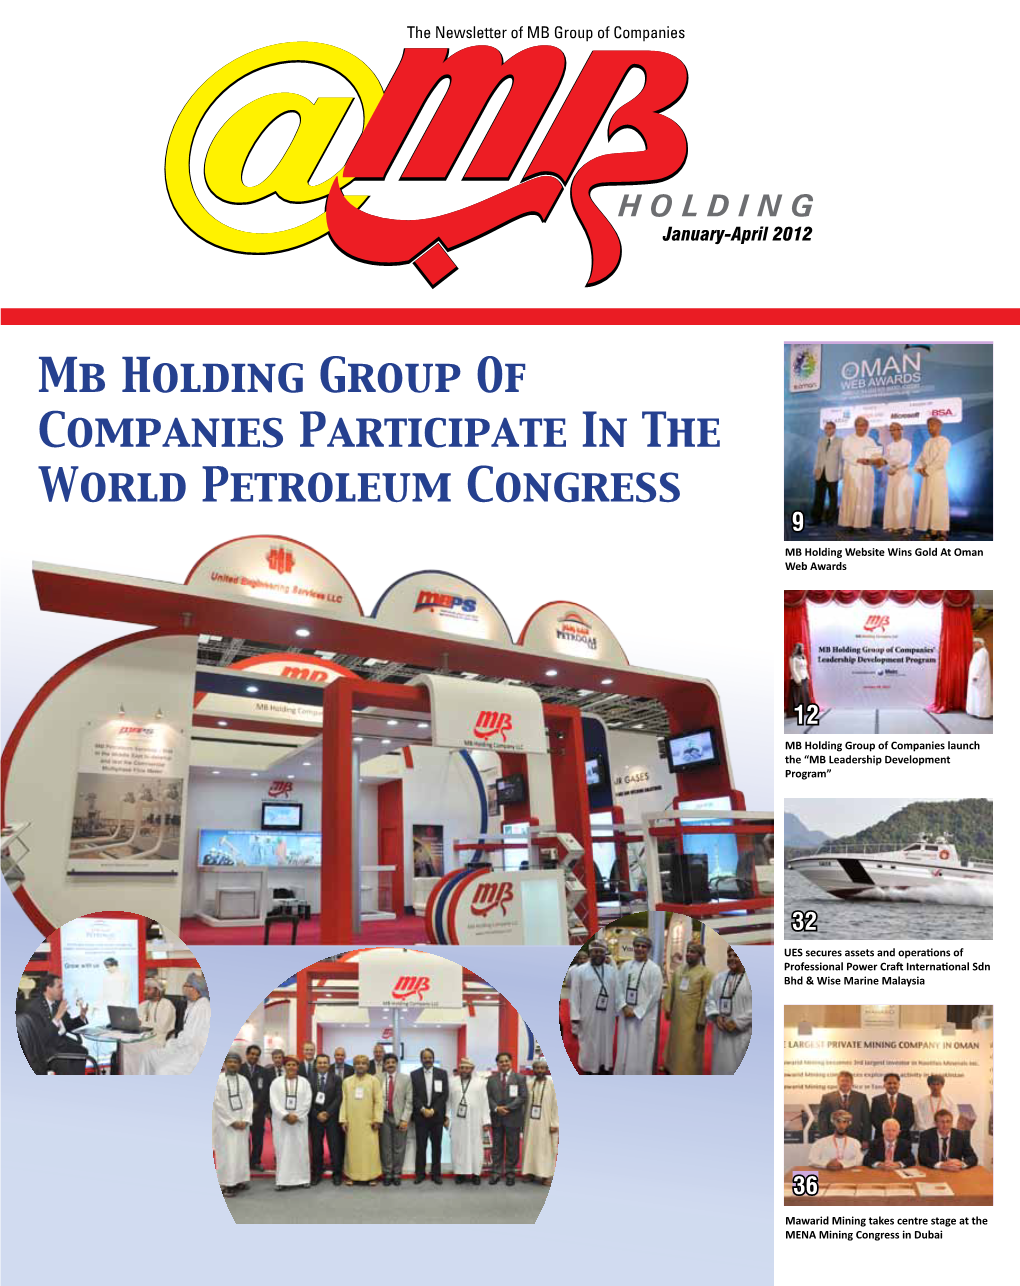 Mb Holding Group of Companies Participate in the World Petroleum Congress 9 MB Holding Website Wins Gold at Oman Web Awards